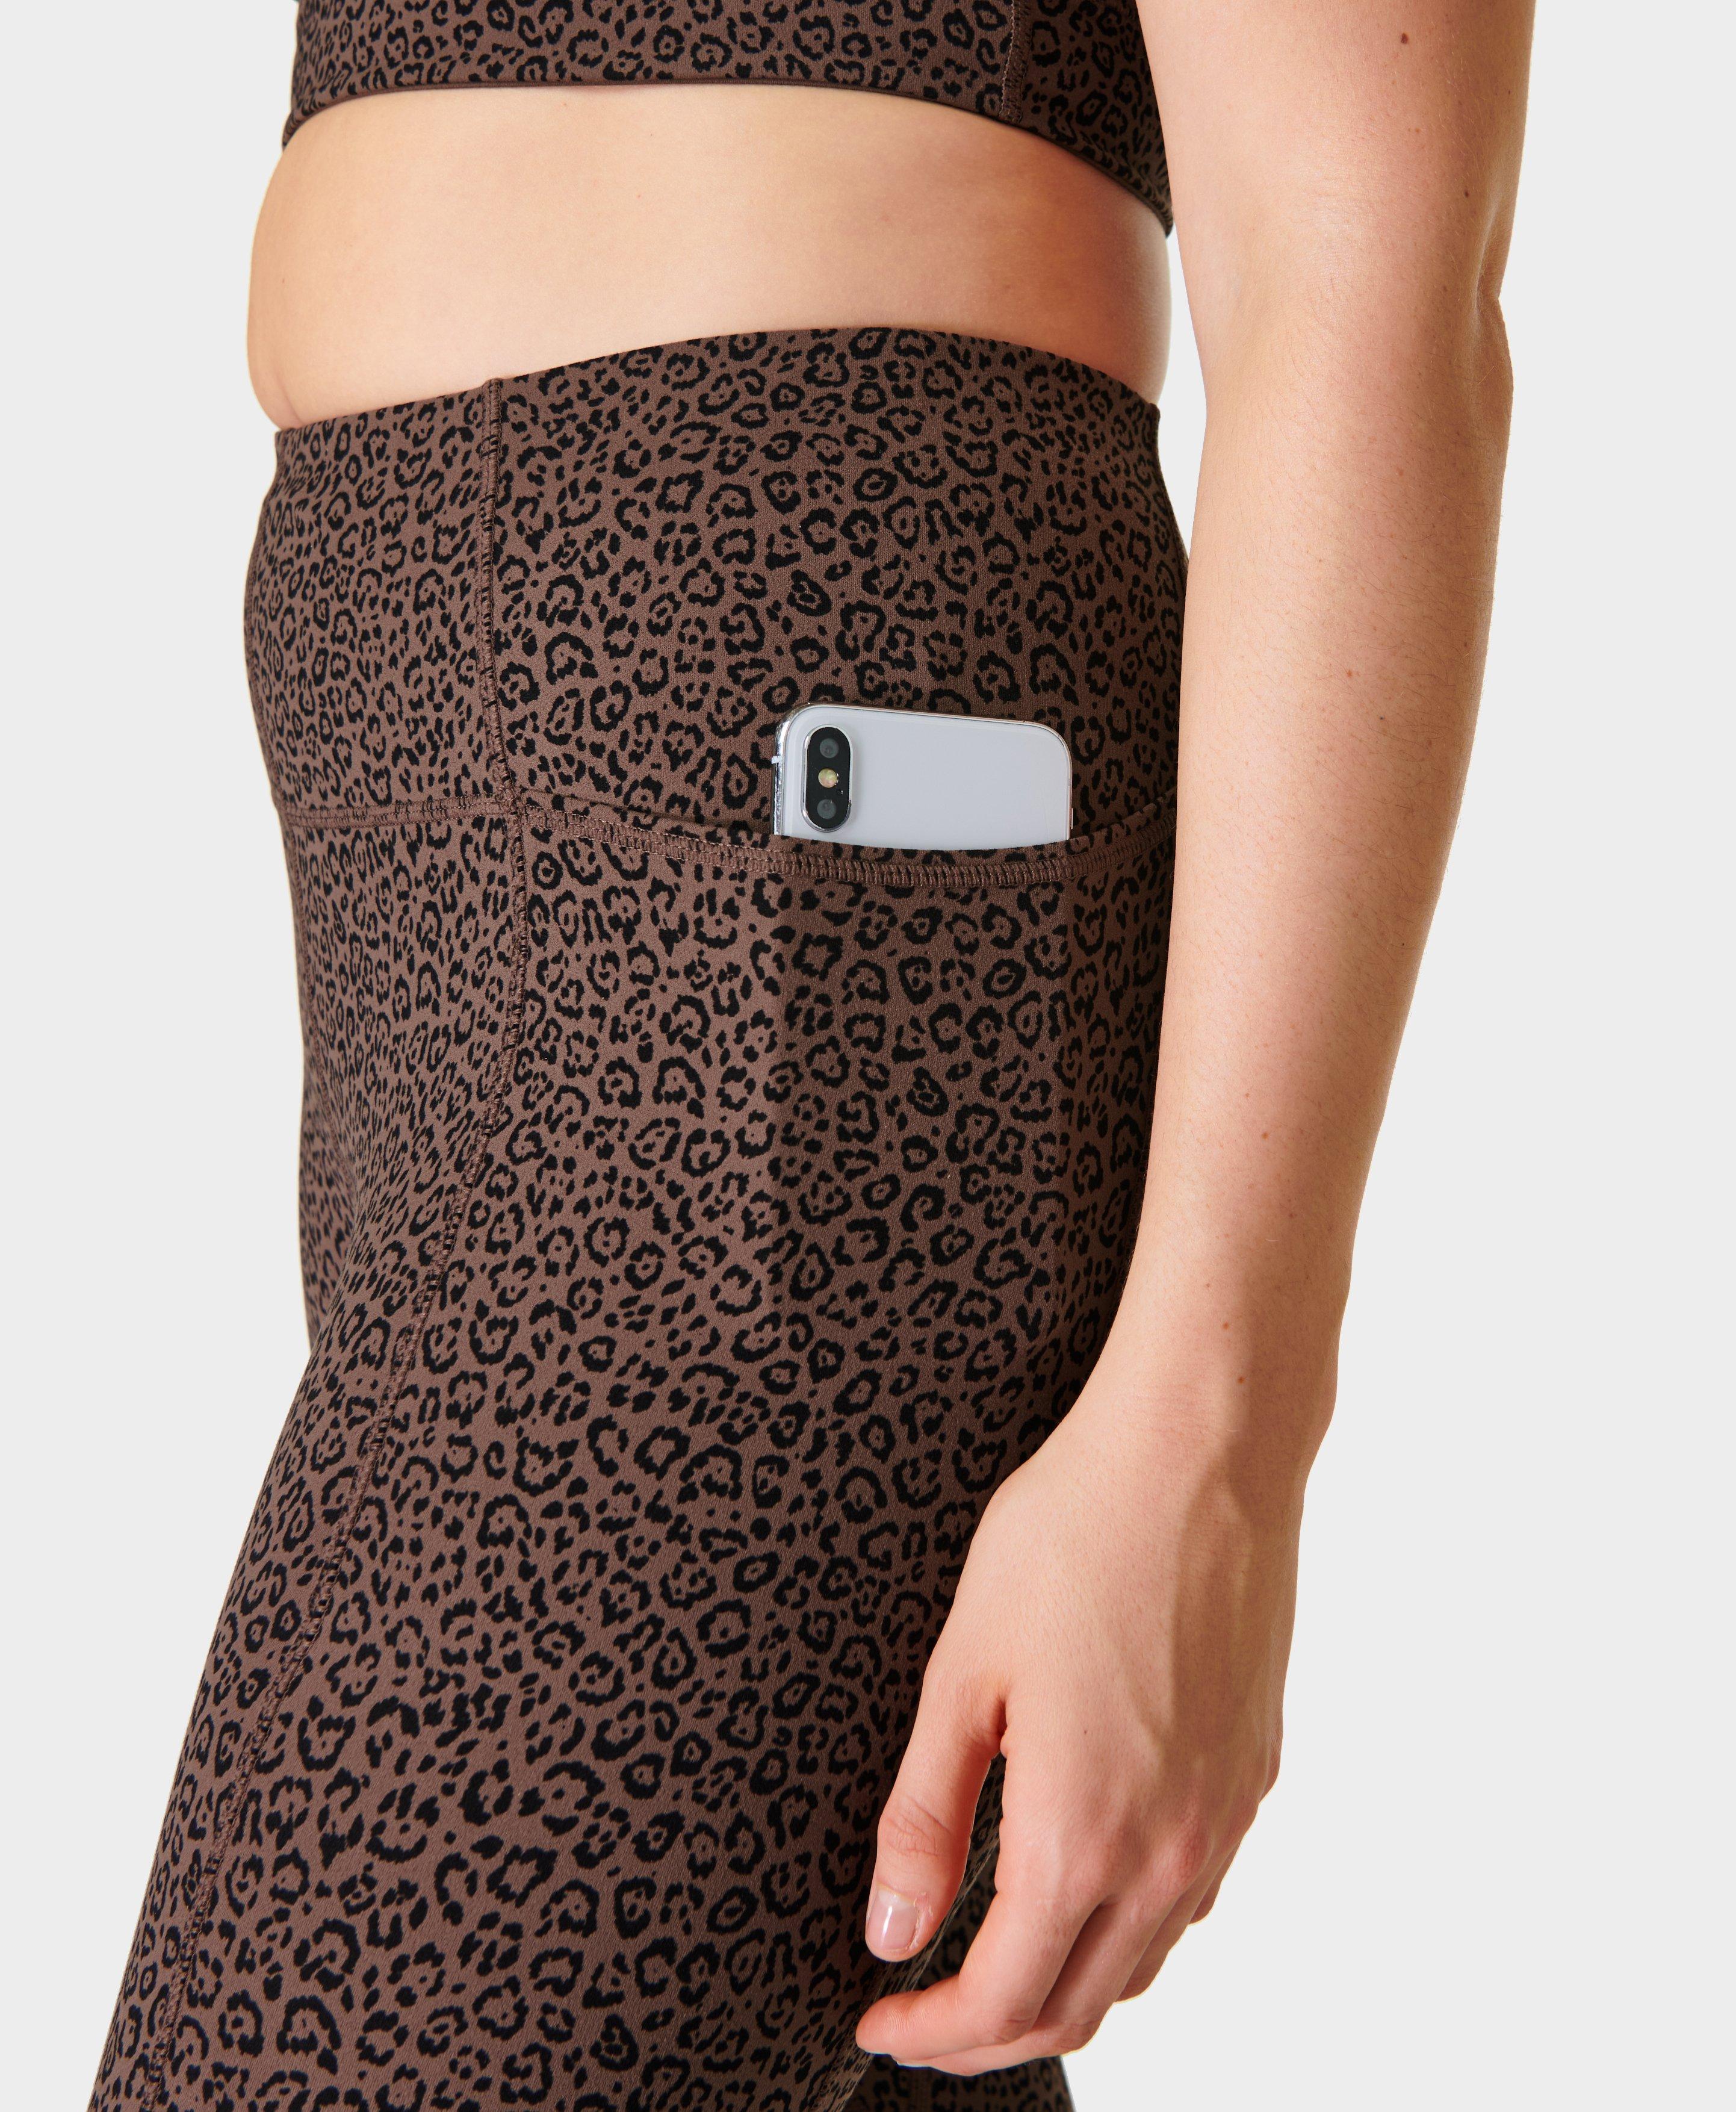 Brown Leopard Leggings with pockets - ClickEdge